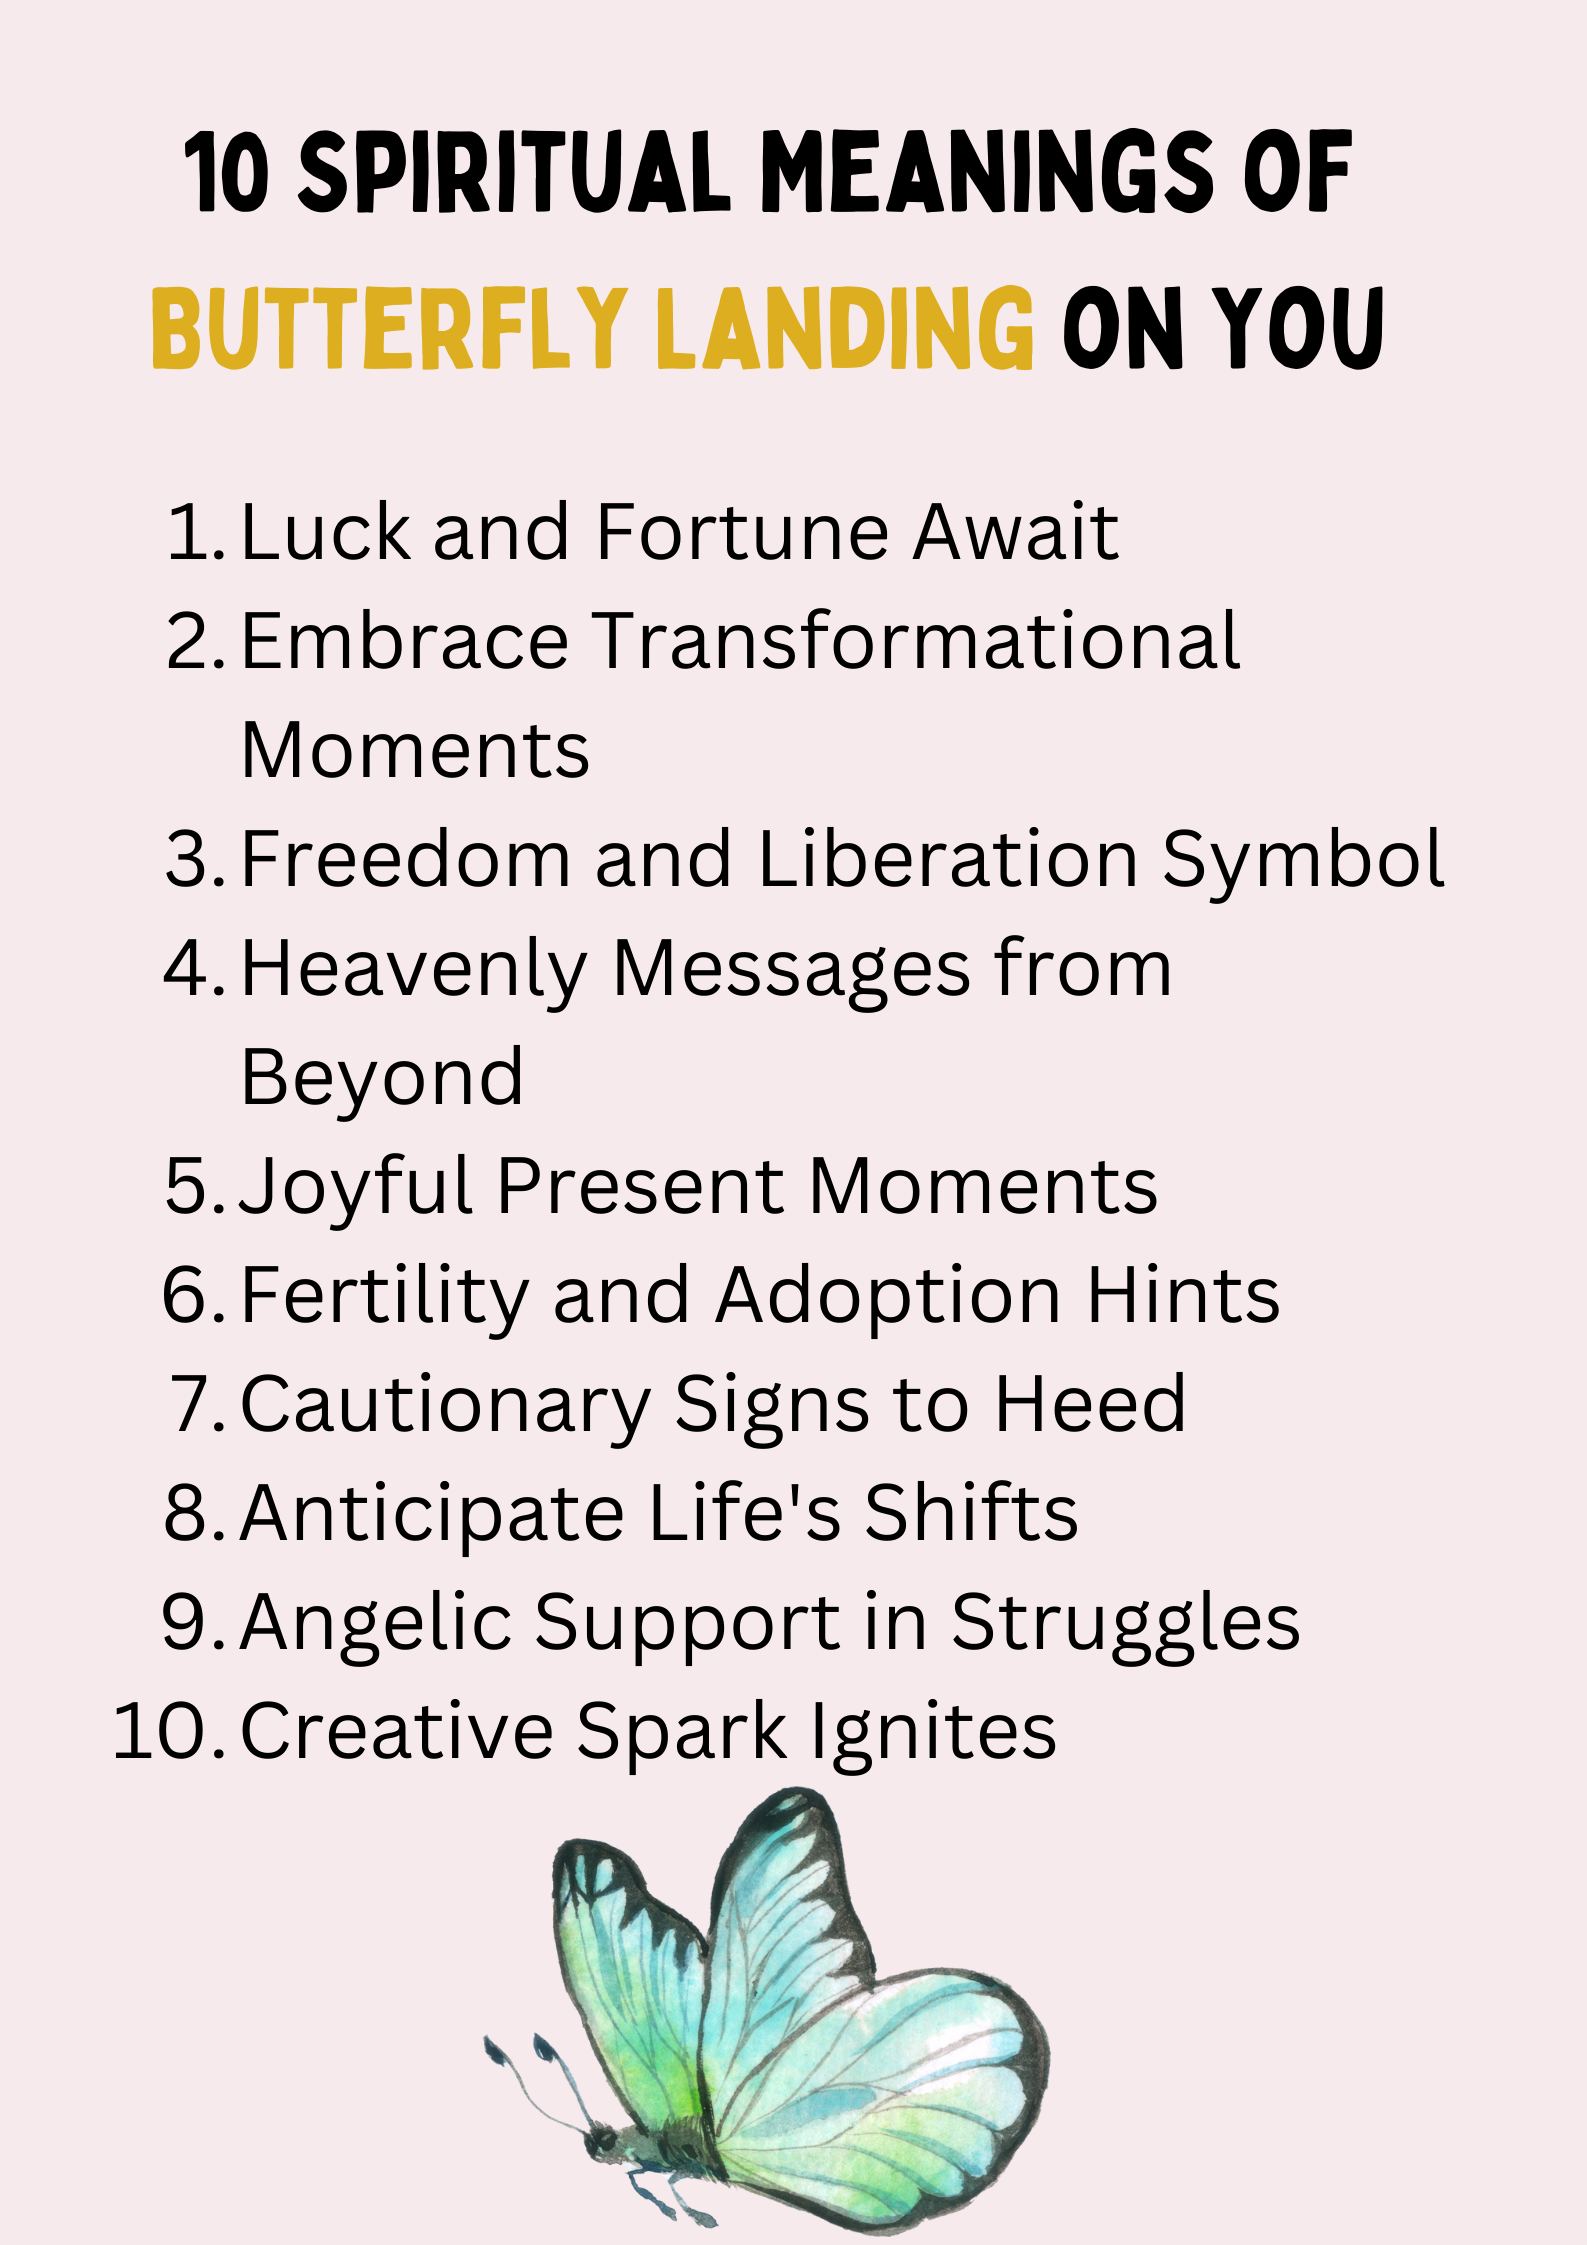 10 Spiritual Meanings of Butterfly Landing on You